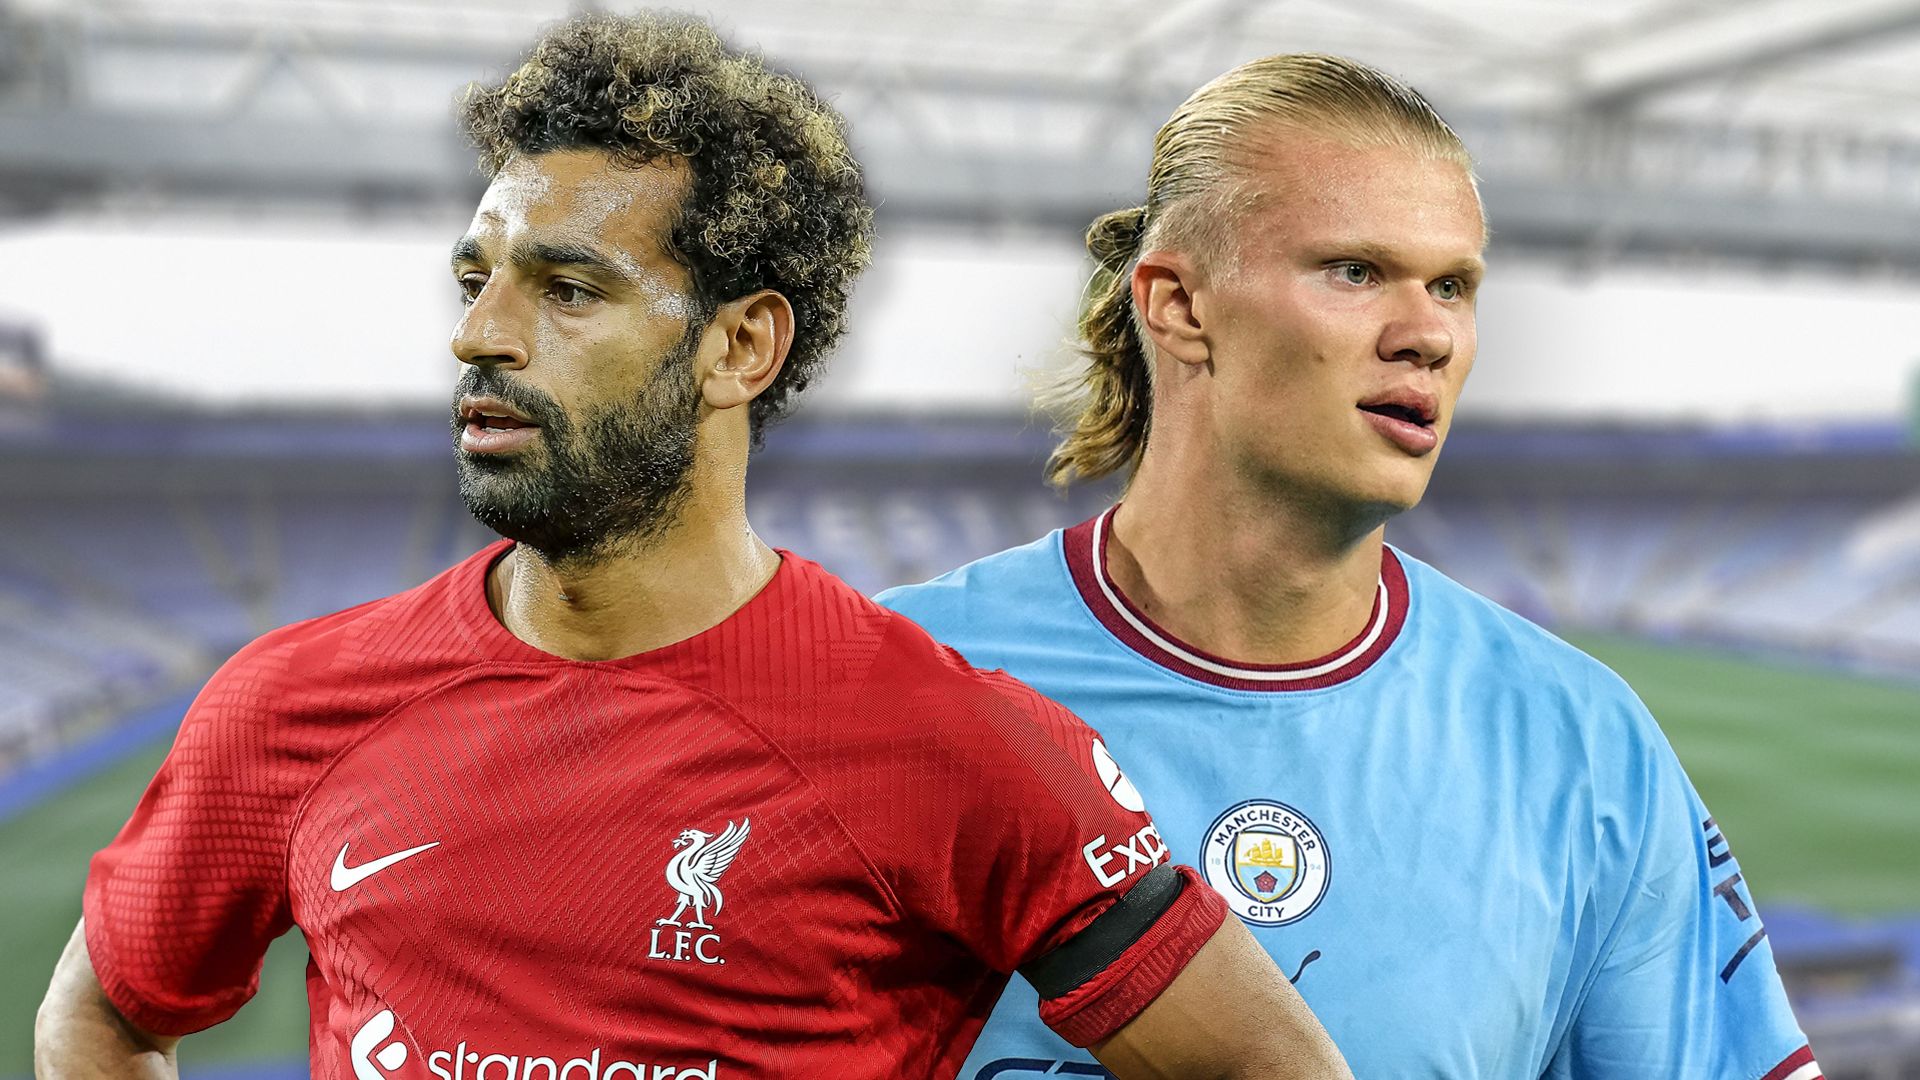 Liverpool vs Manchester City LIVE! Premier League champions take on FA Cup winners in Community Shield